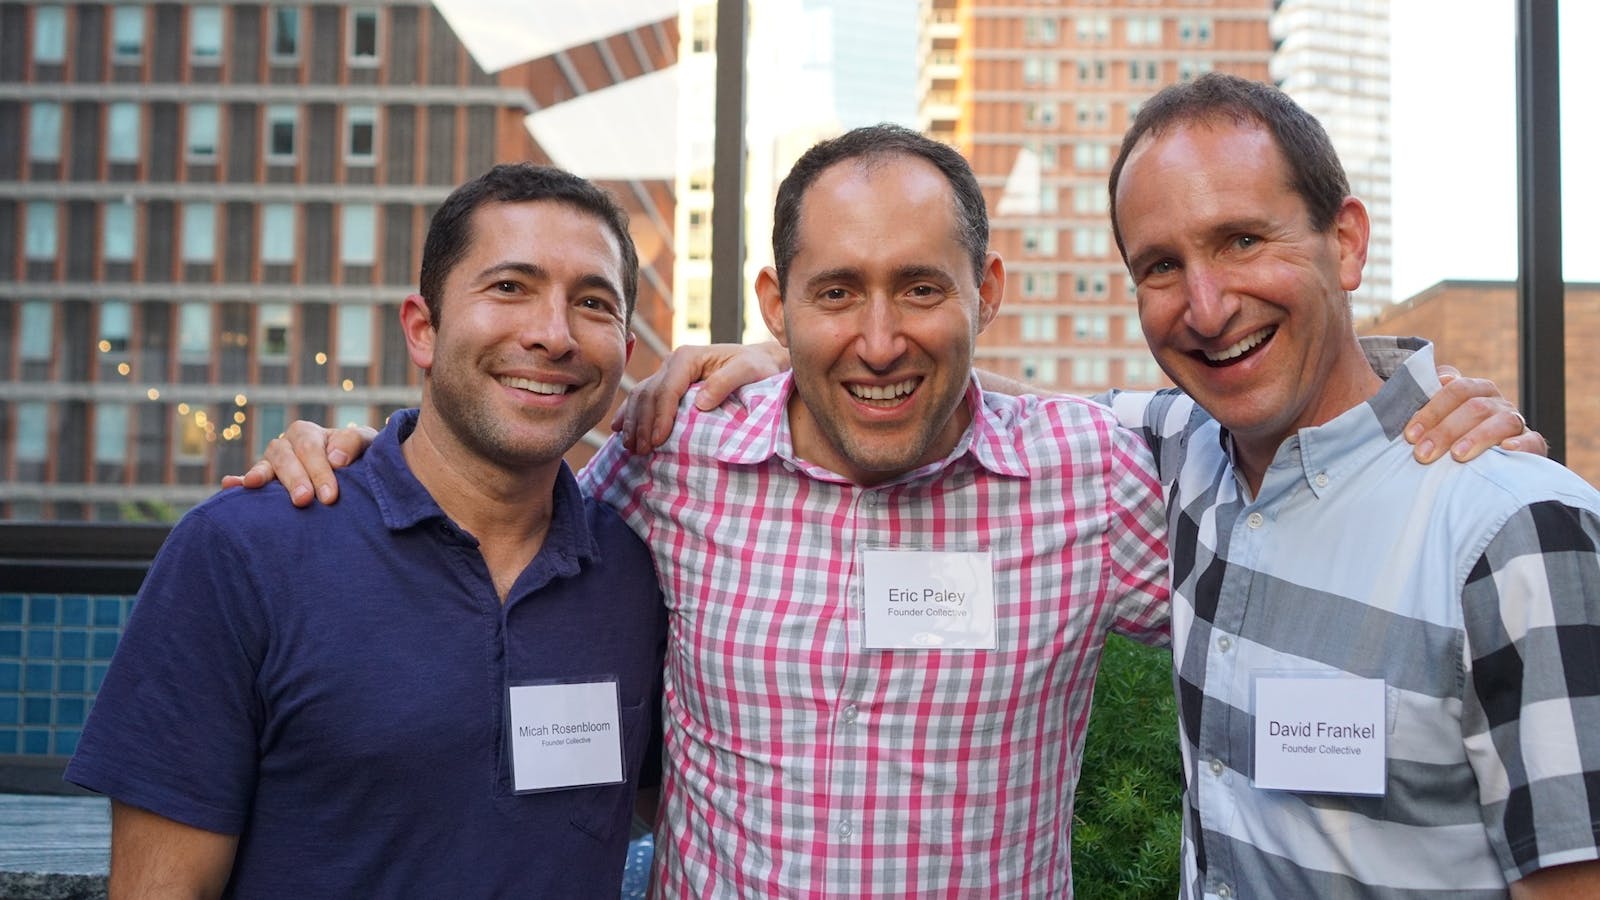 Founder Collective partners Micah Rosenbloom, Eric Paley and David Frankel. Photo courtesy of Founder Collective